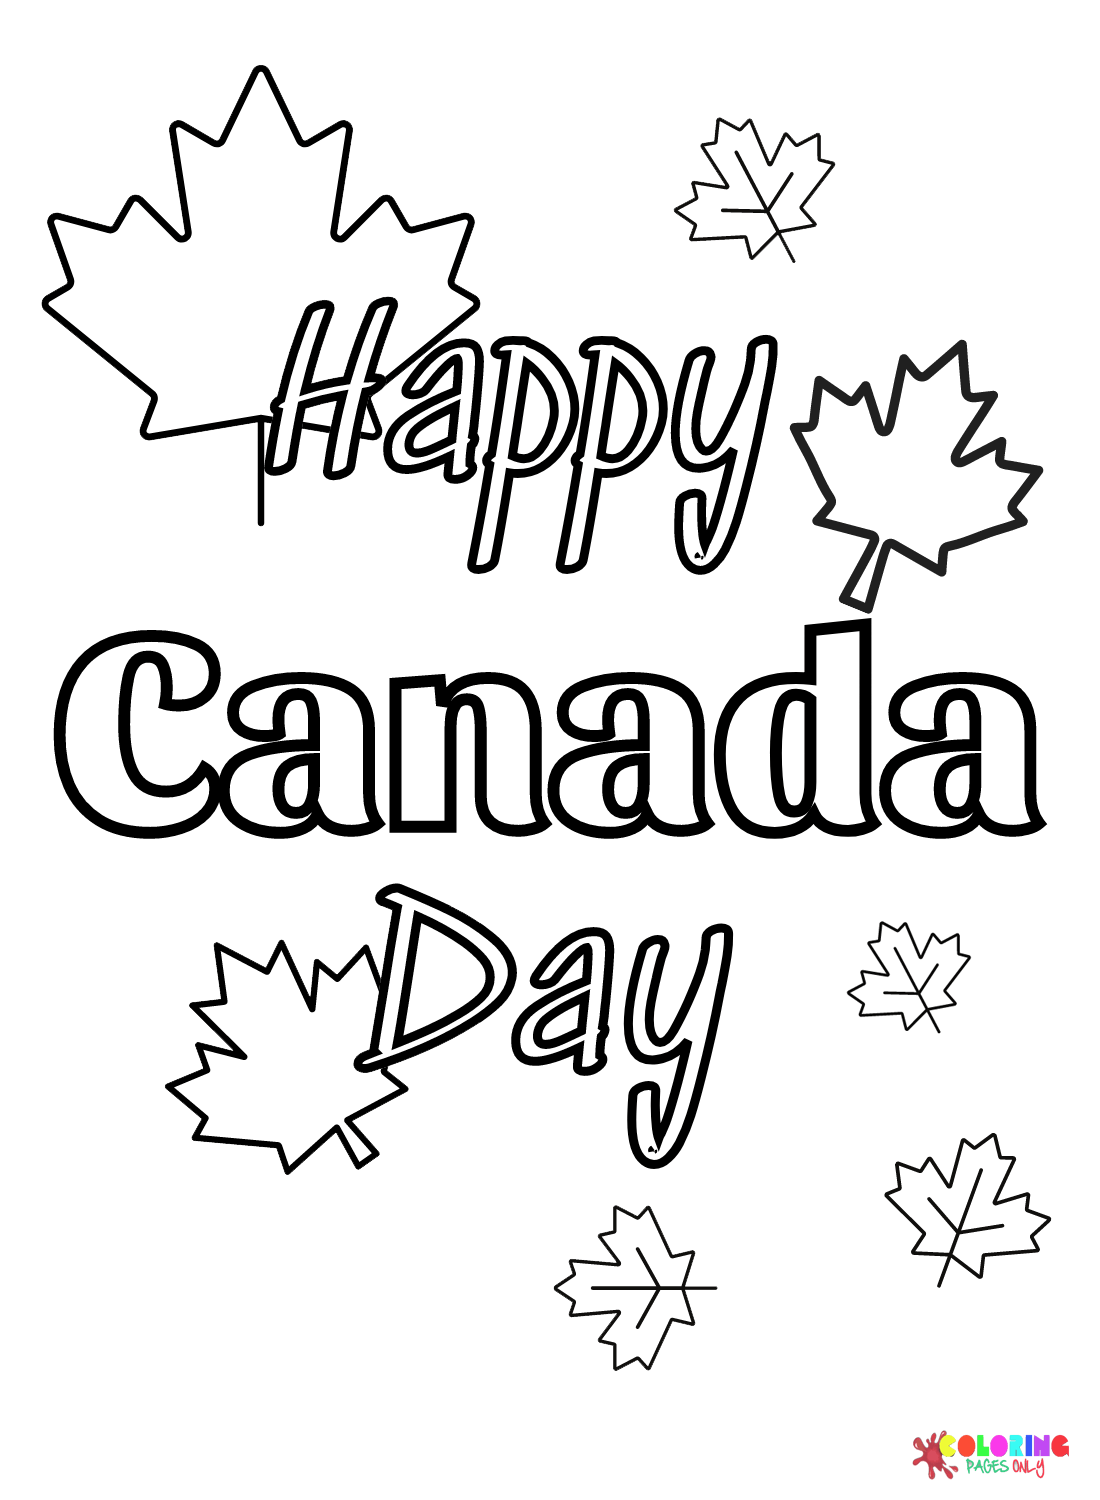 Happy Canada Day Doodle from Canada Day